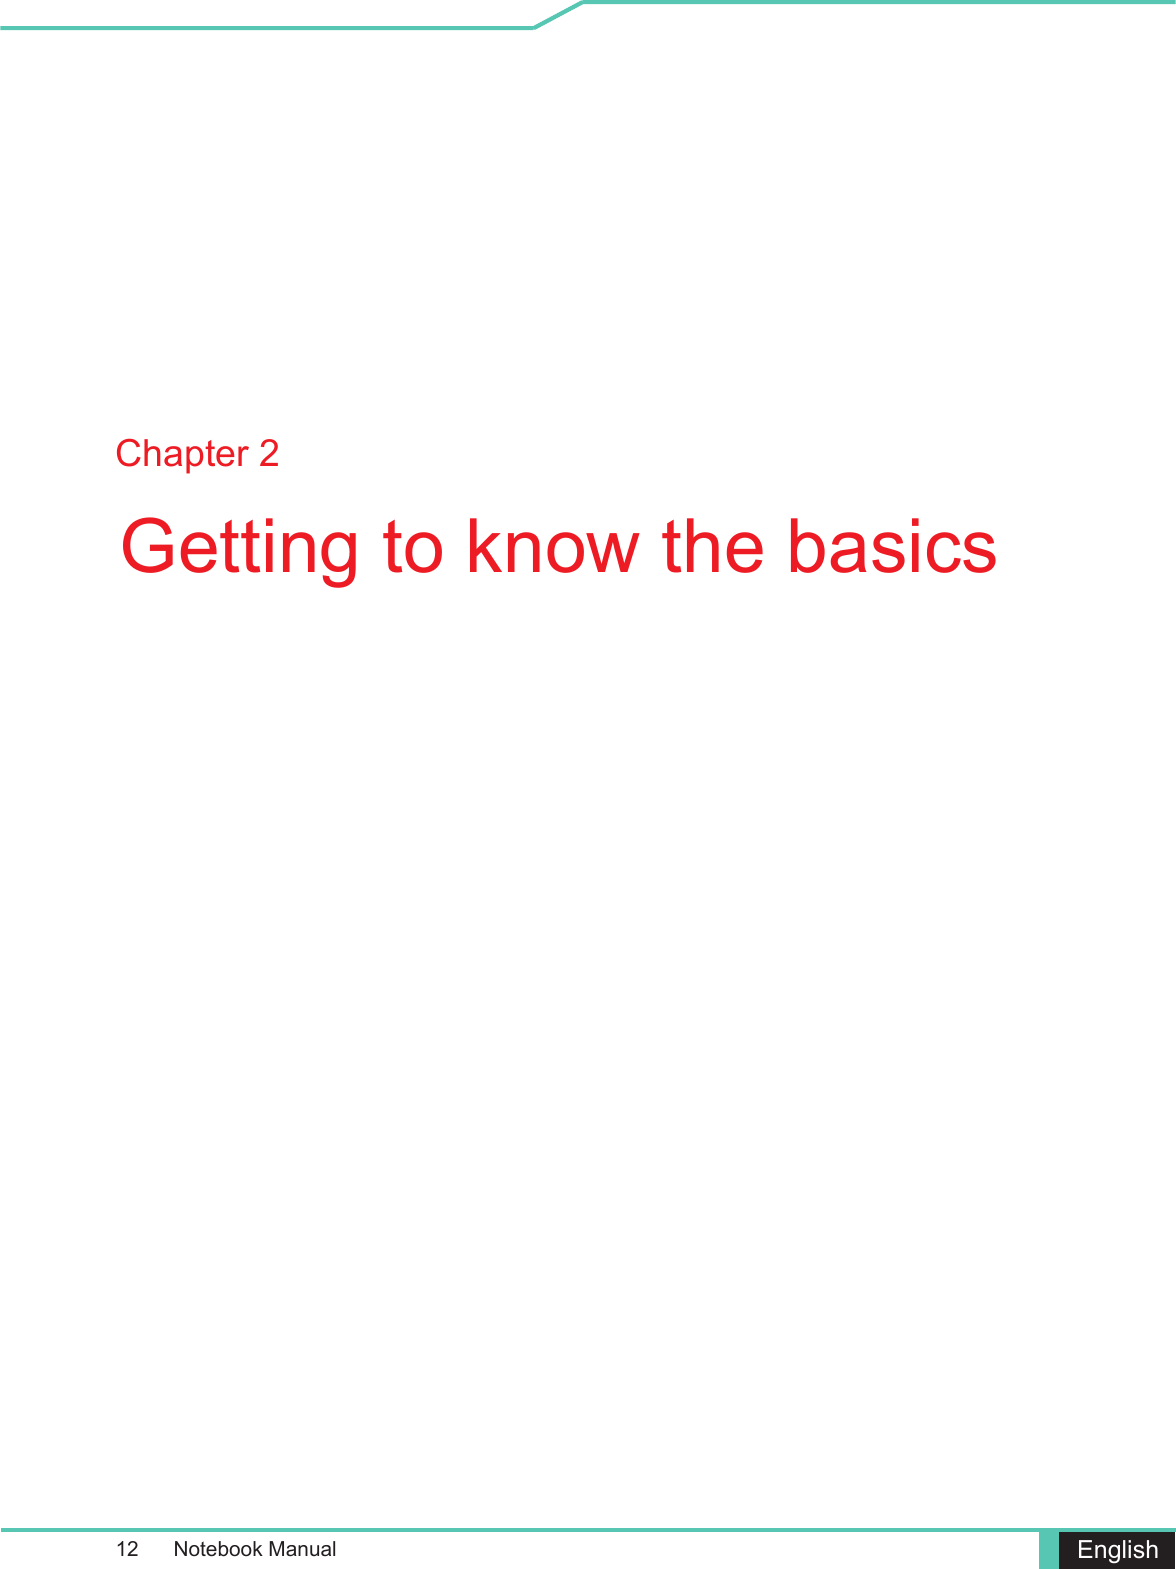 12      Notebook Manual EnglishGetting to know the basicsChapter 2